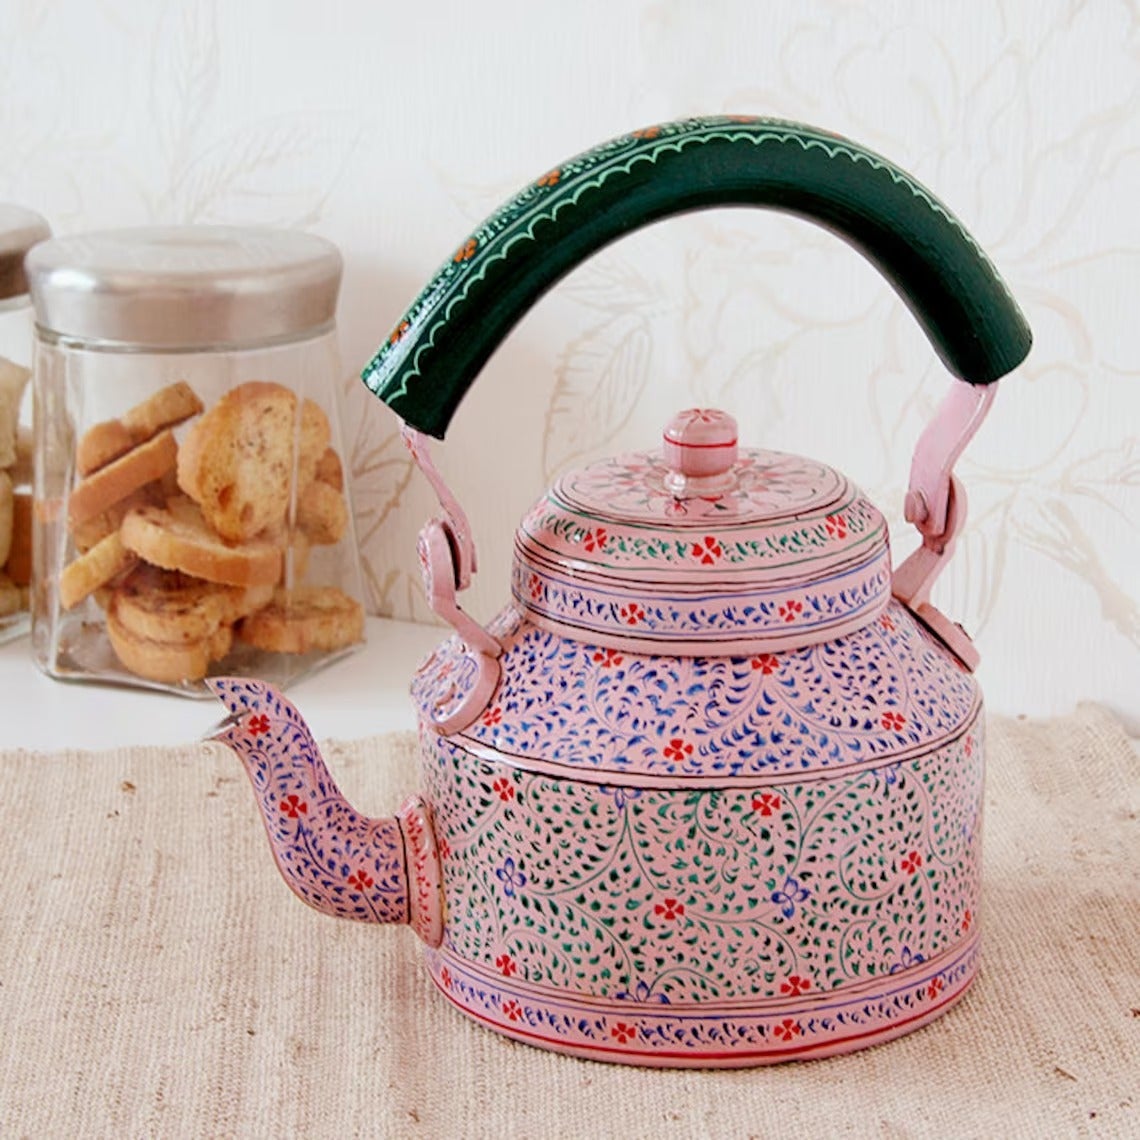 The pink kettle with a green floral handle